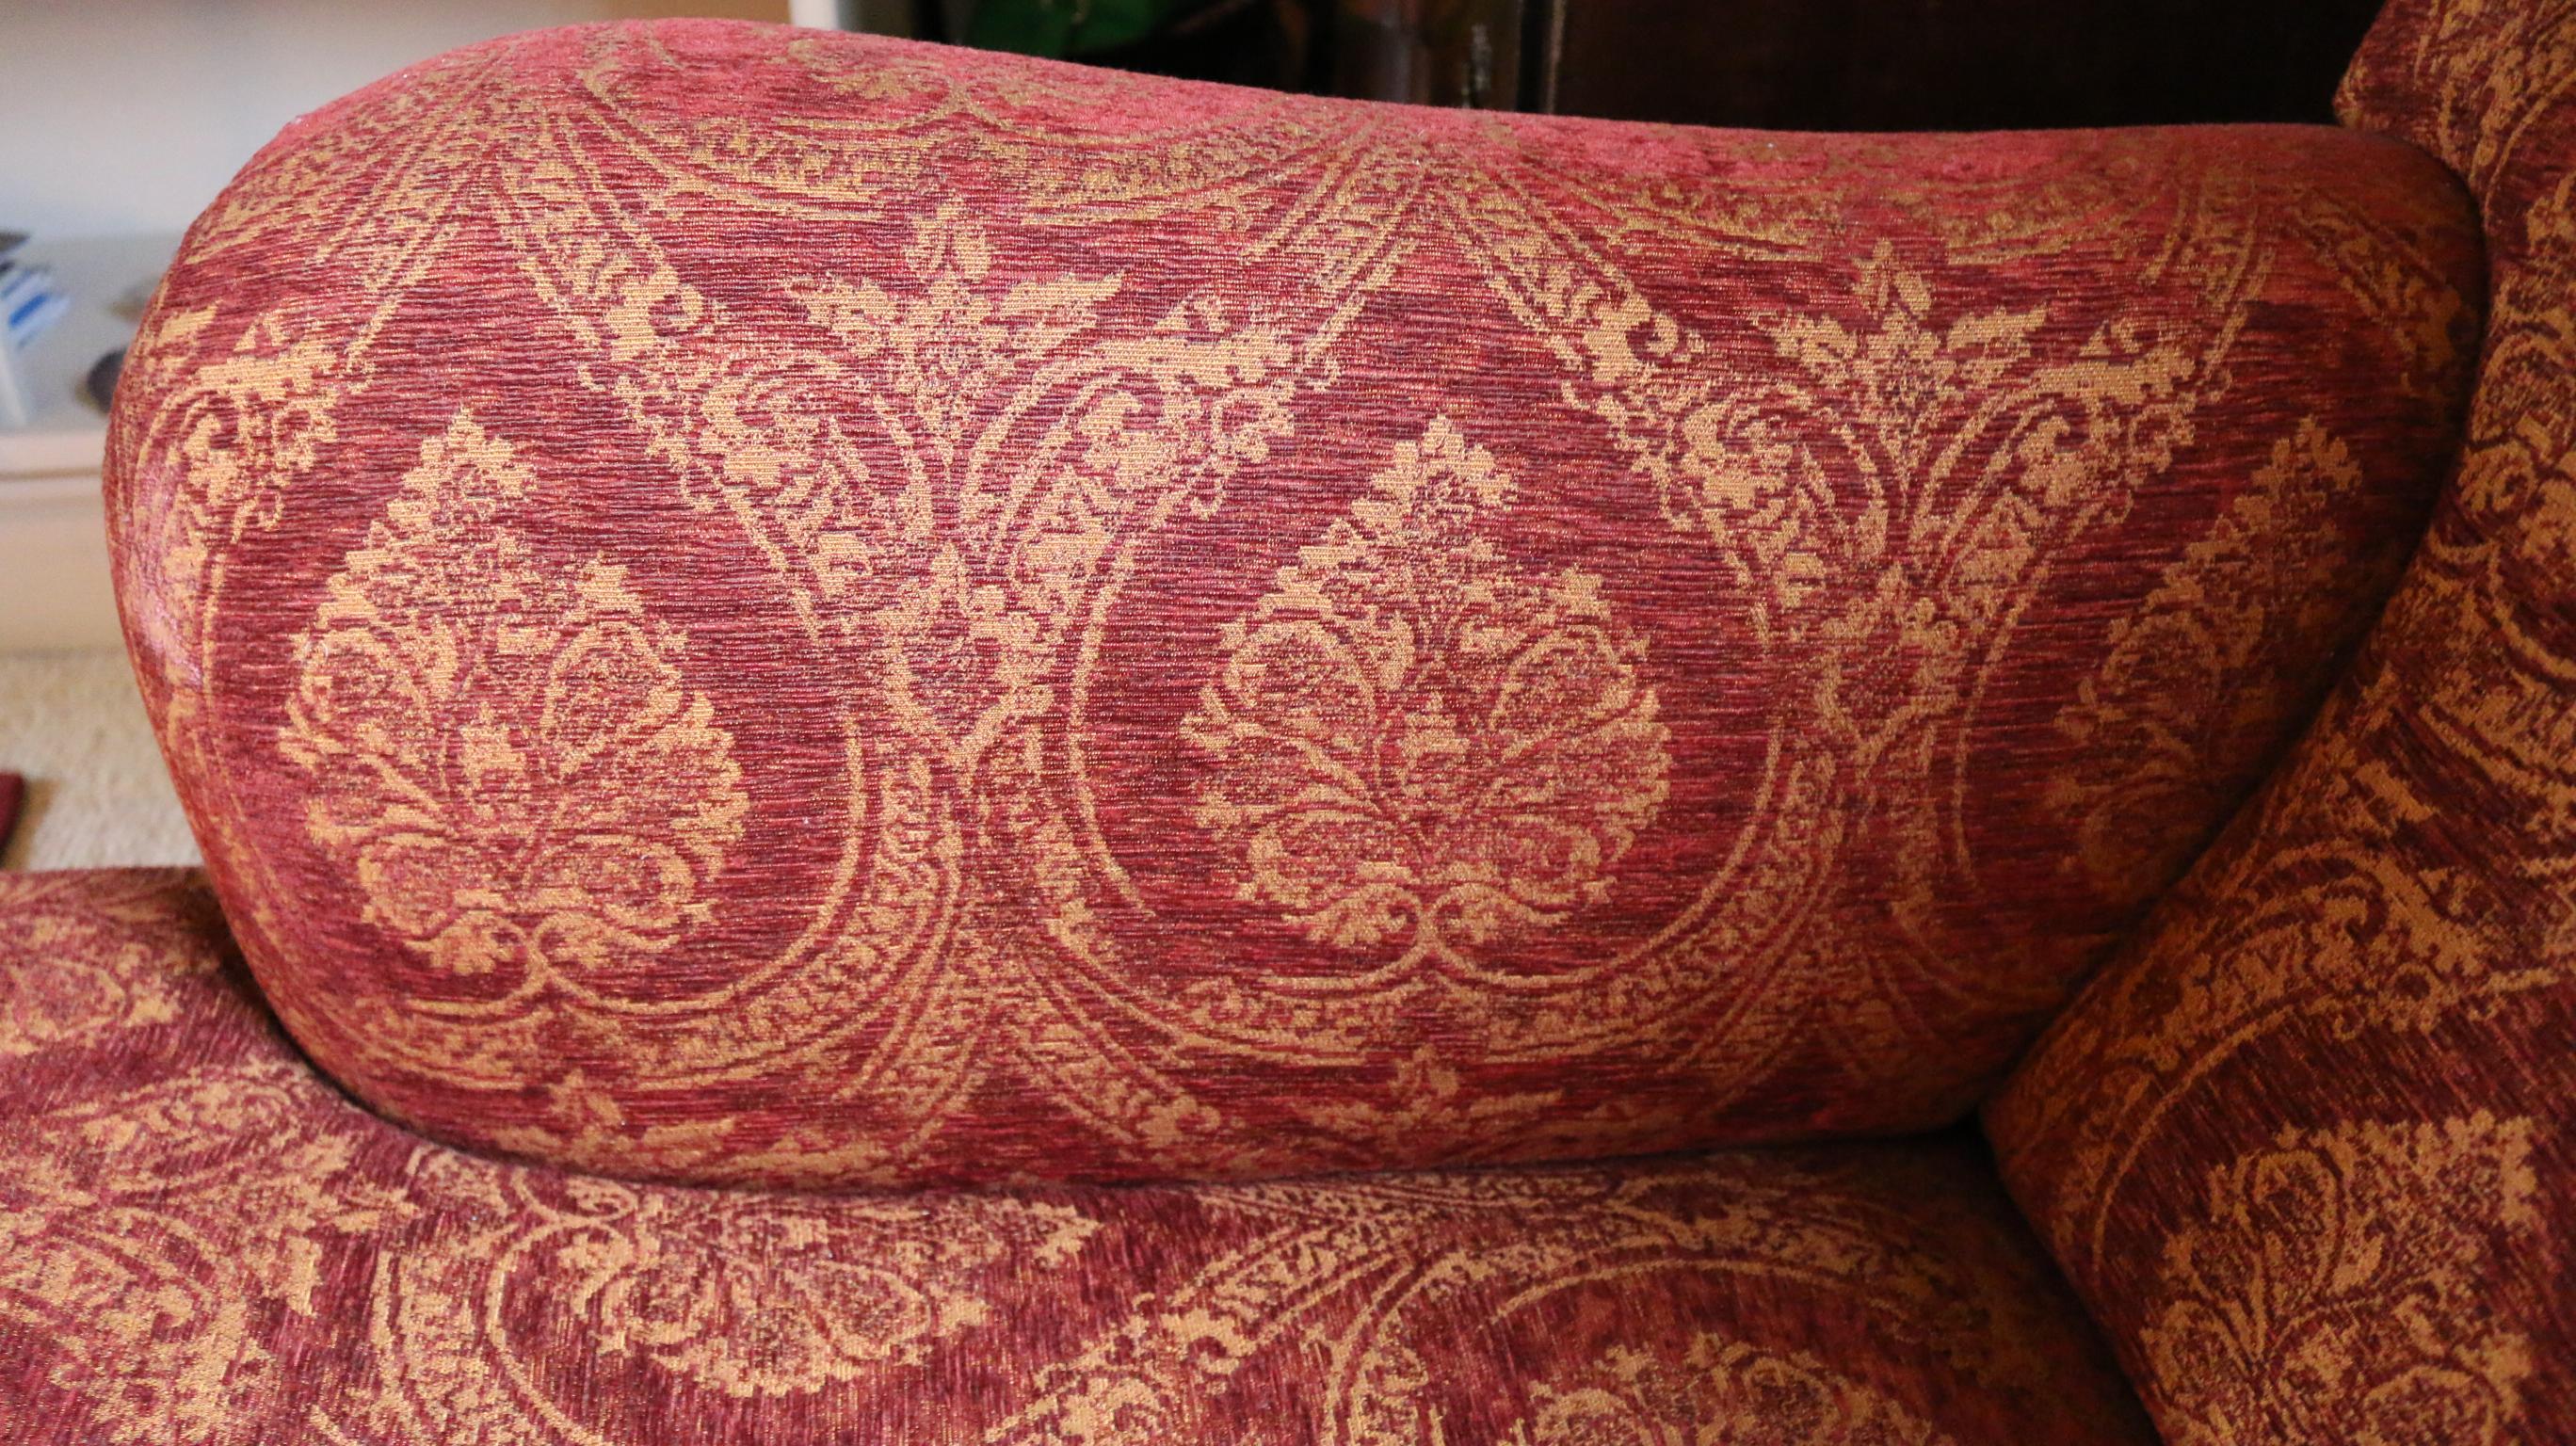 Textile Settee Sofa Pair of 3-Seat Howard Parker & Farr Red-Wine Gold Mulberry Paisley